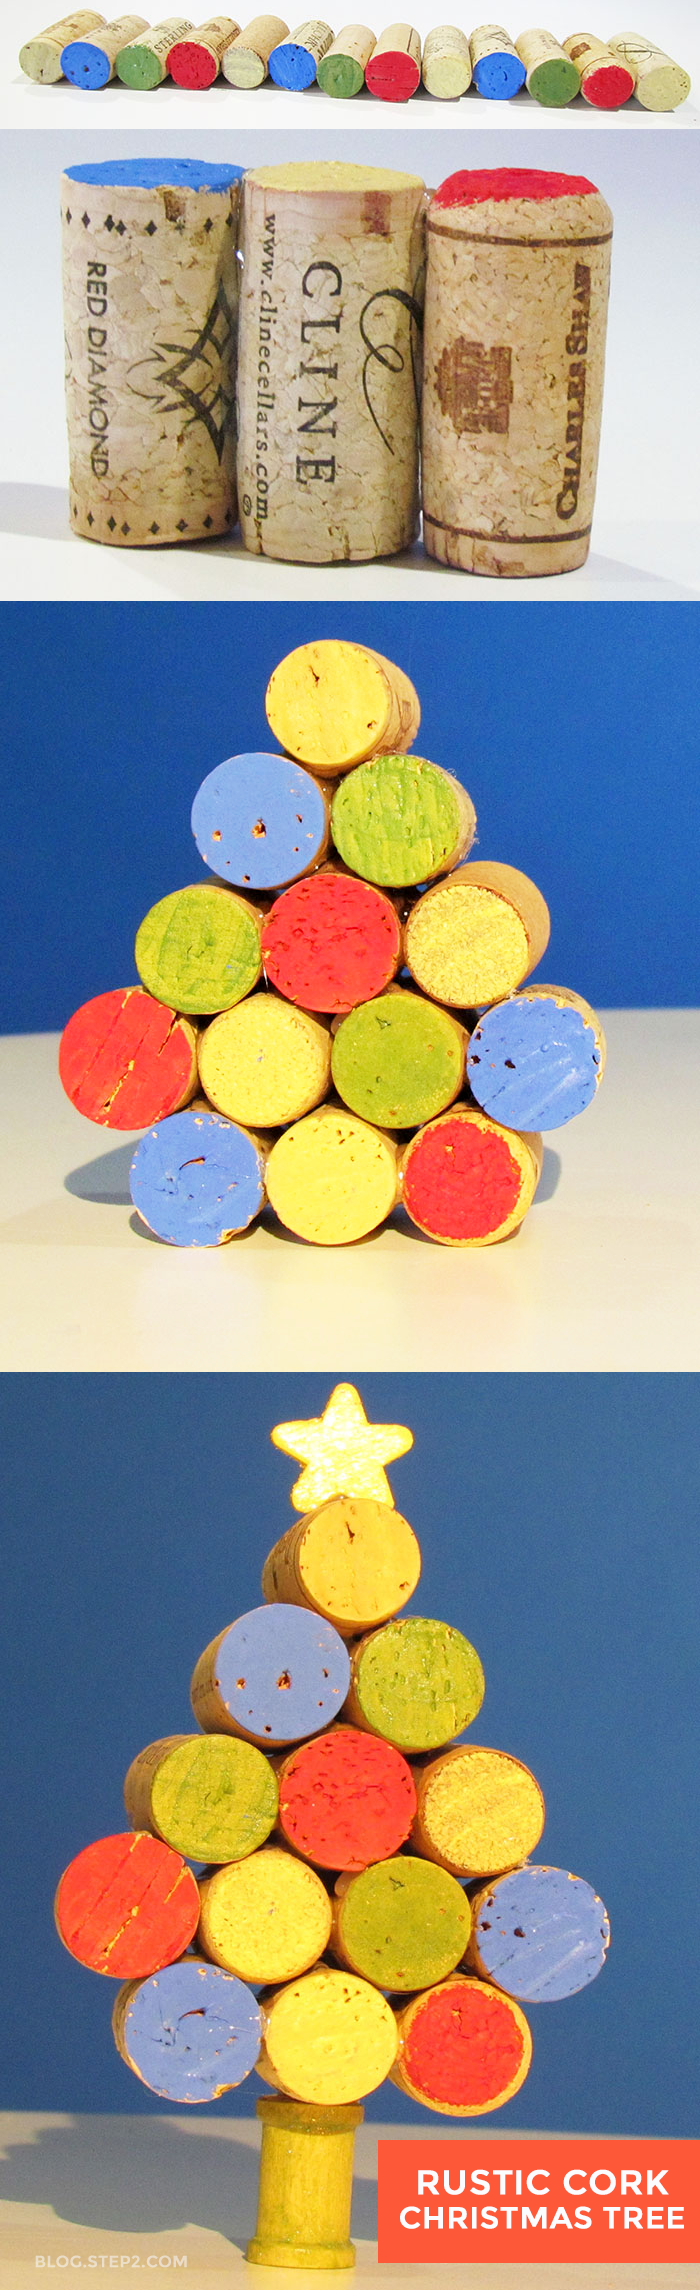 Looking for a fun and simple <parent> Christmas craft? Make a Rustic Cork Christmas Tree! Great for a teacher gift or holiday decor.